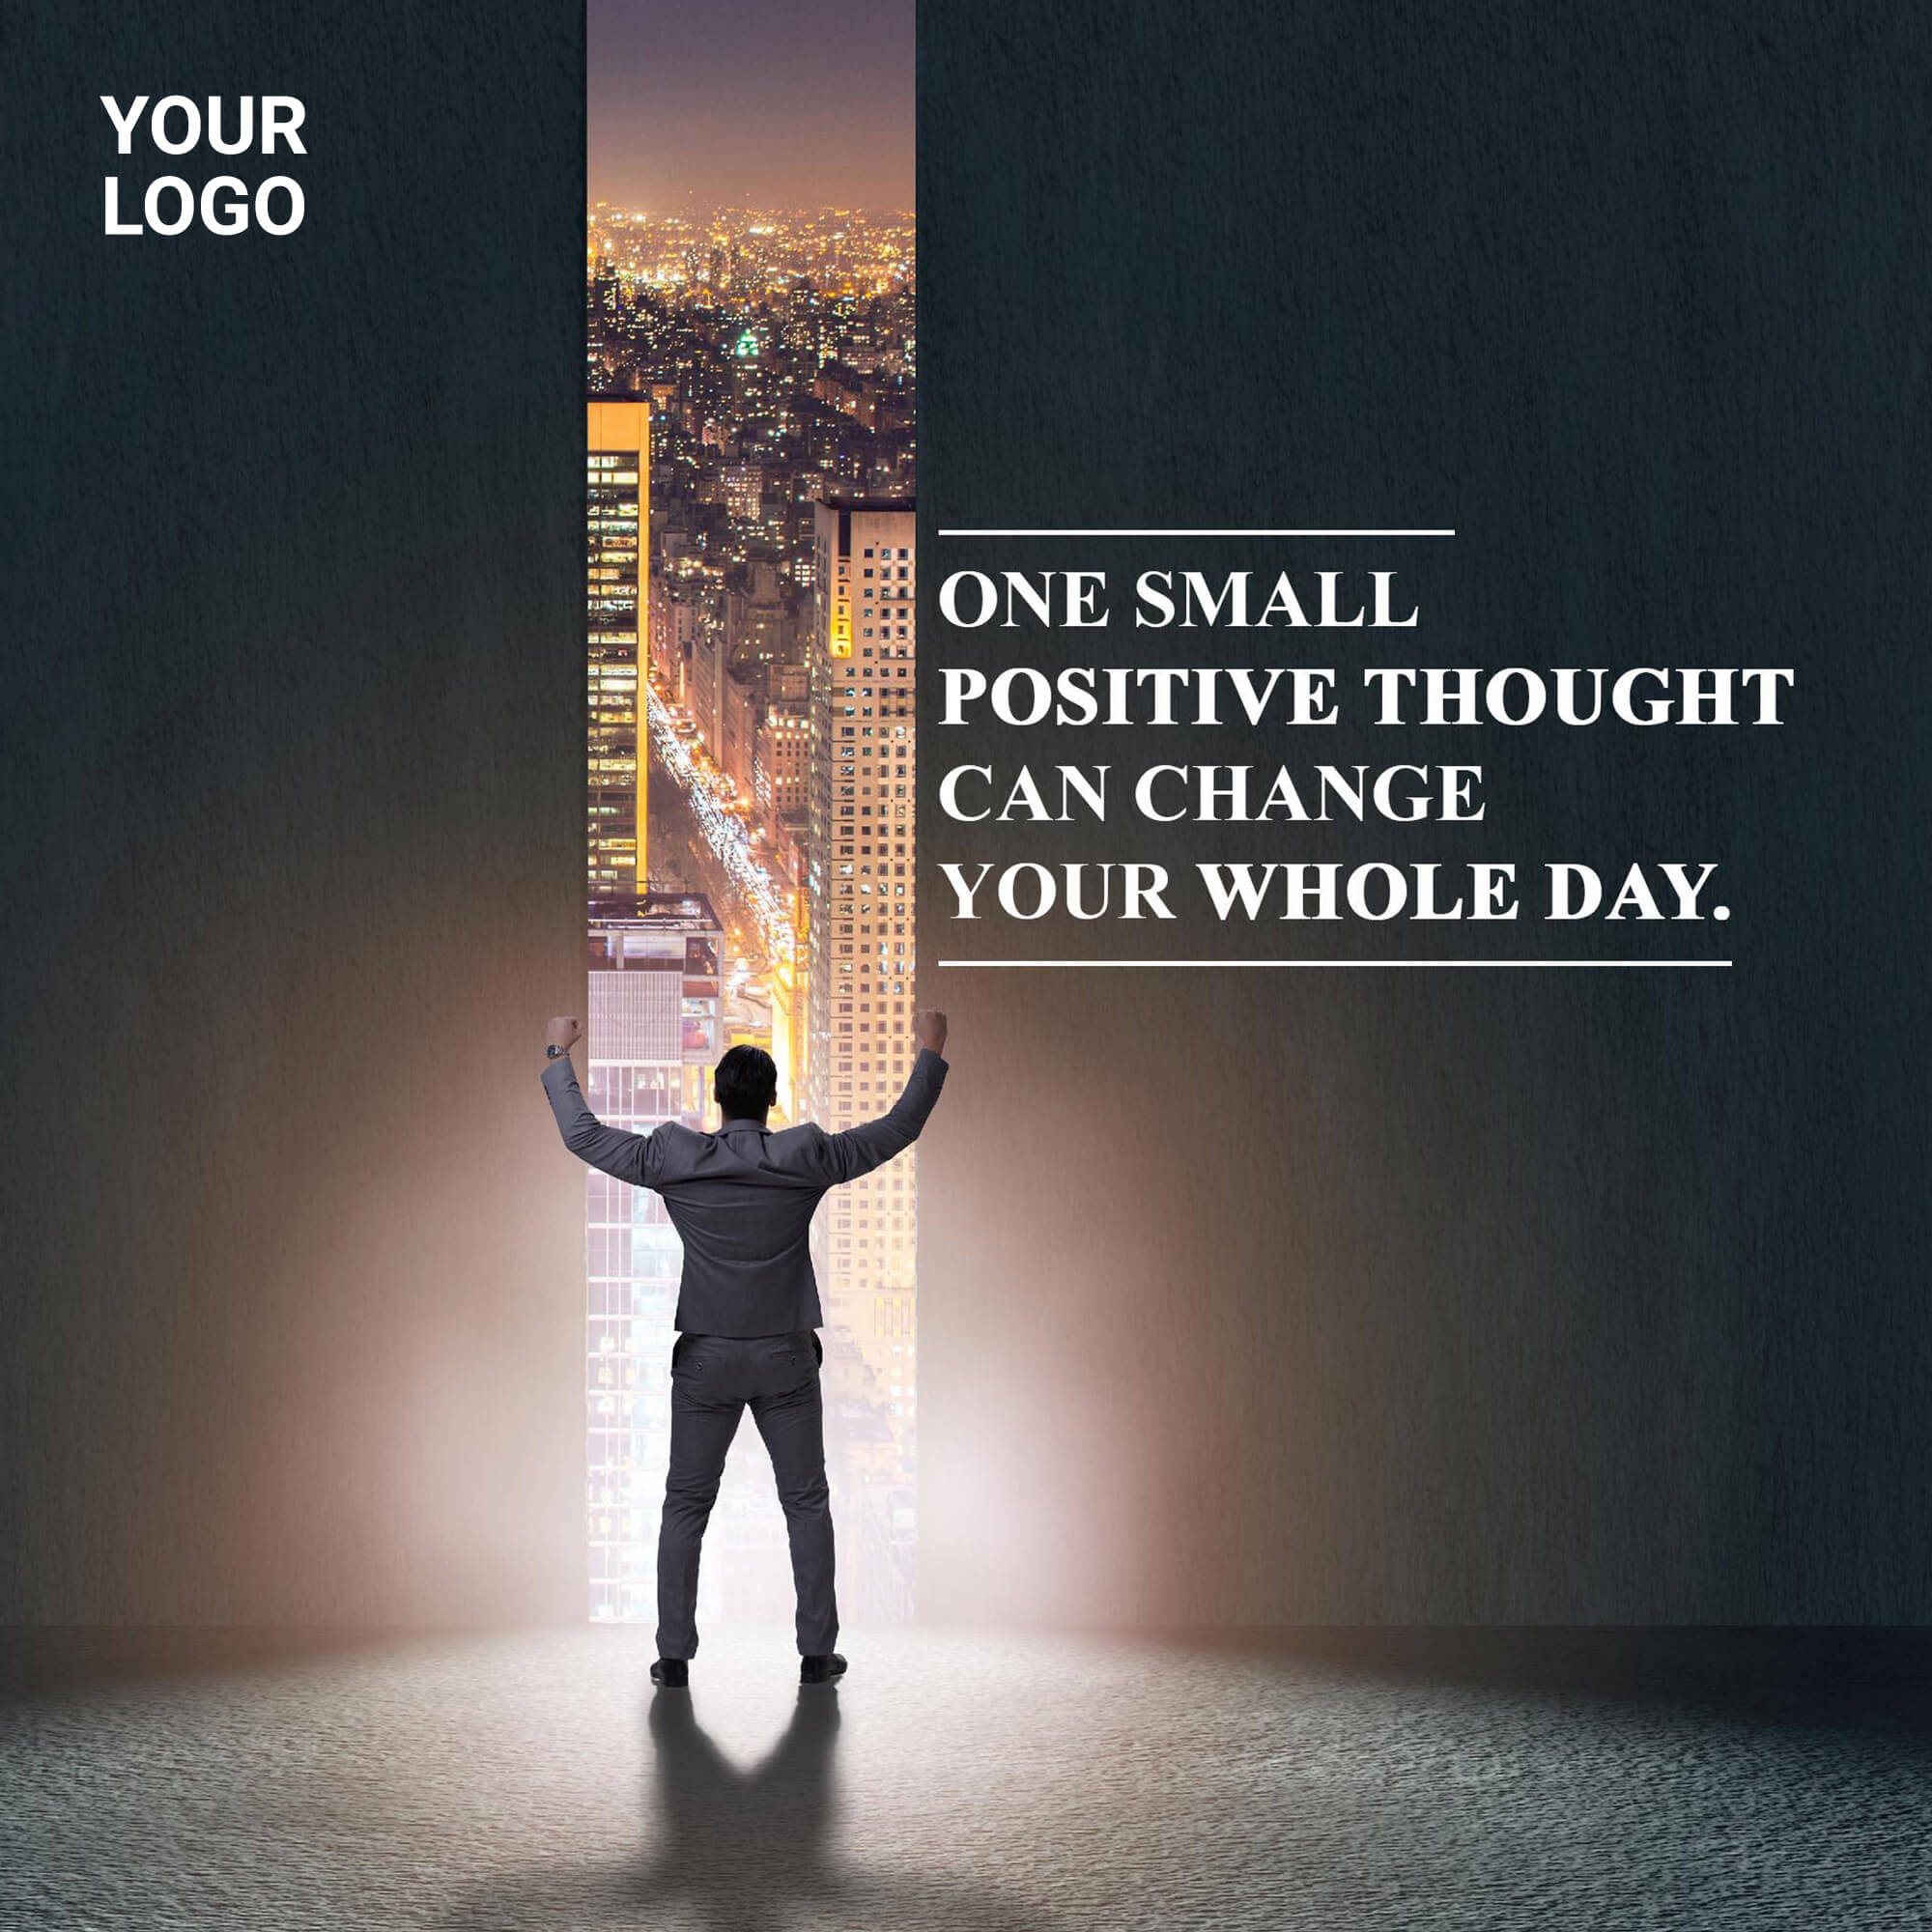 Good Thoughts Banner Maker